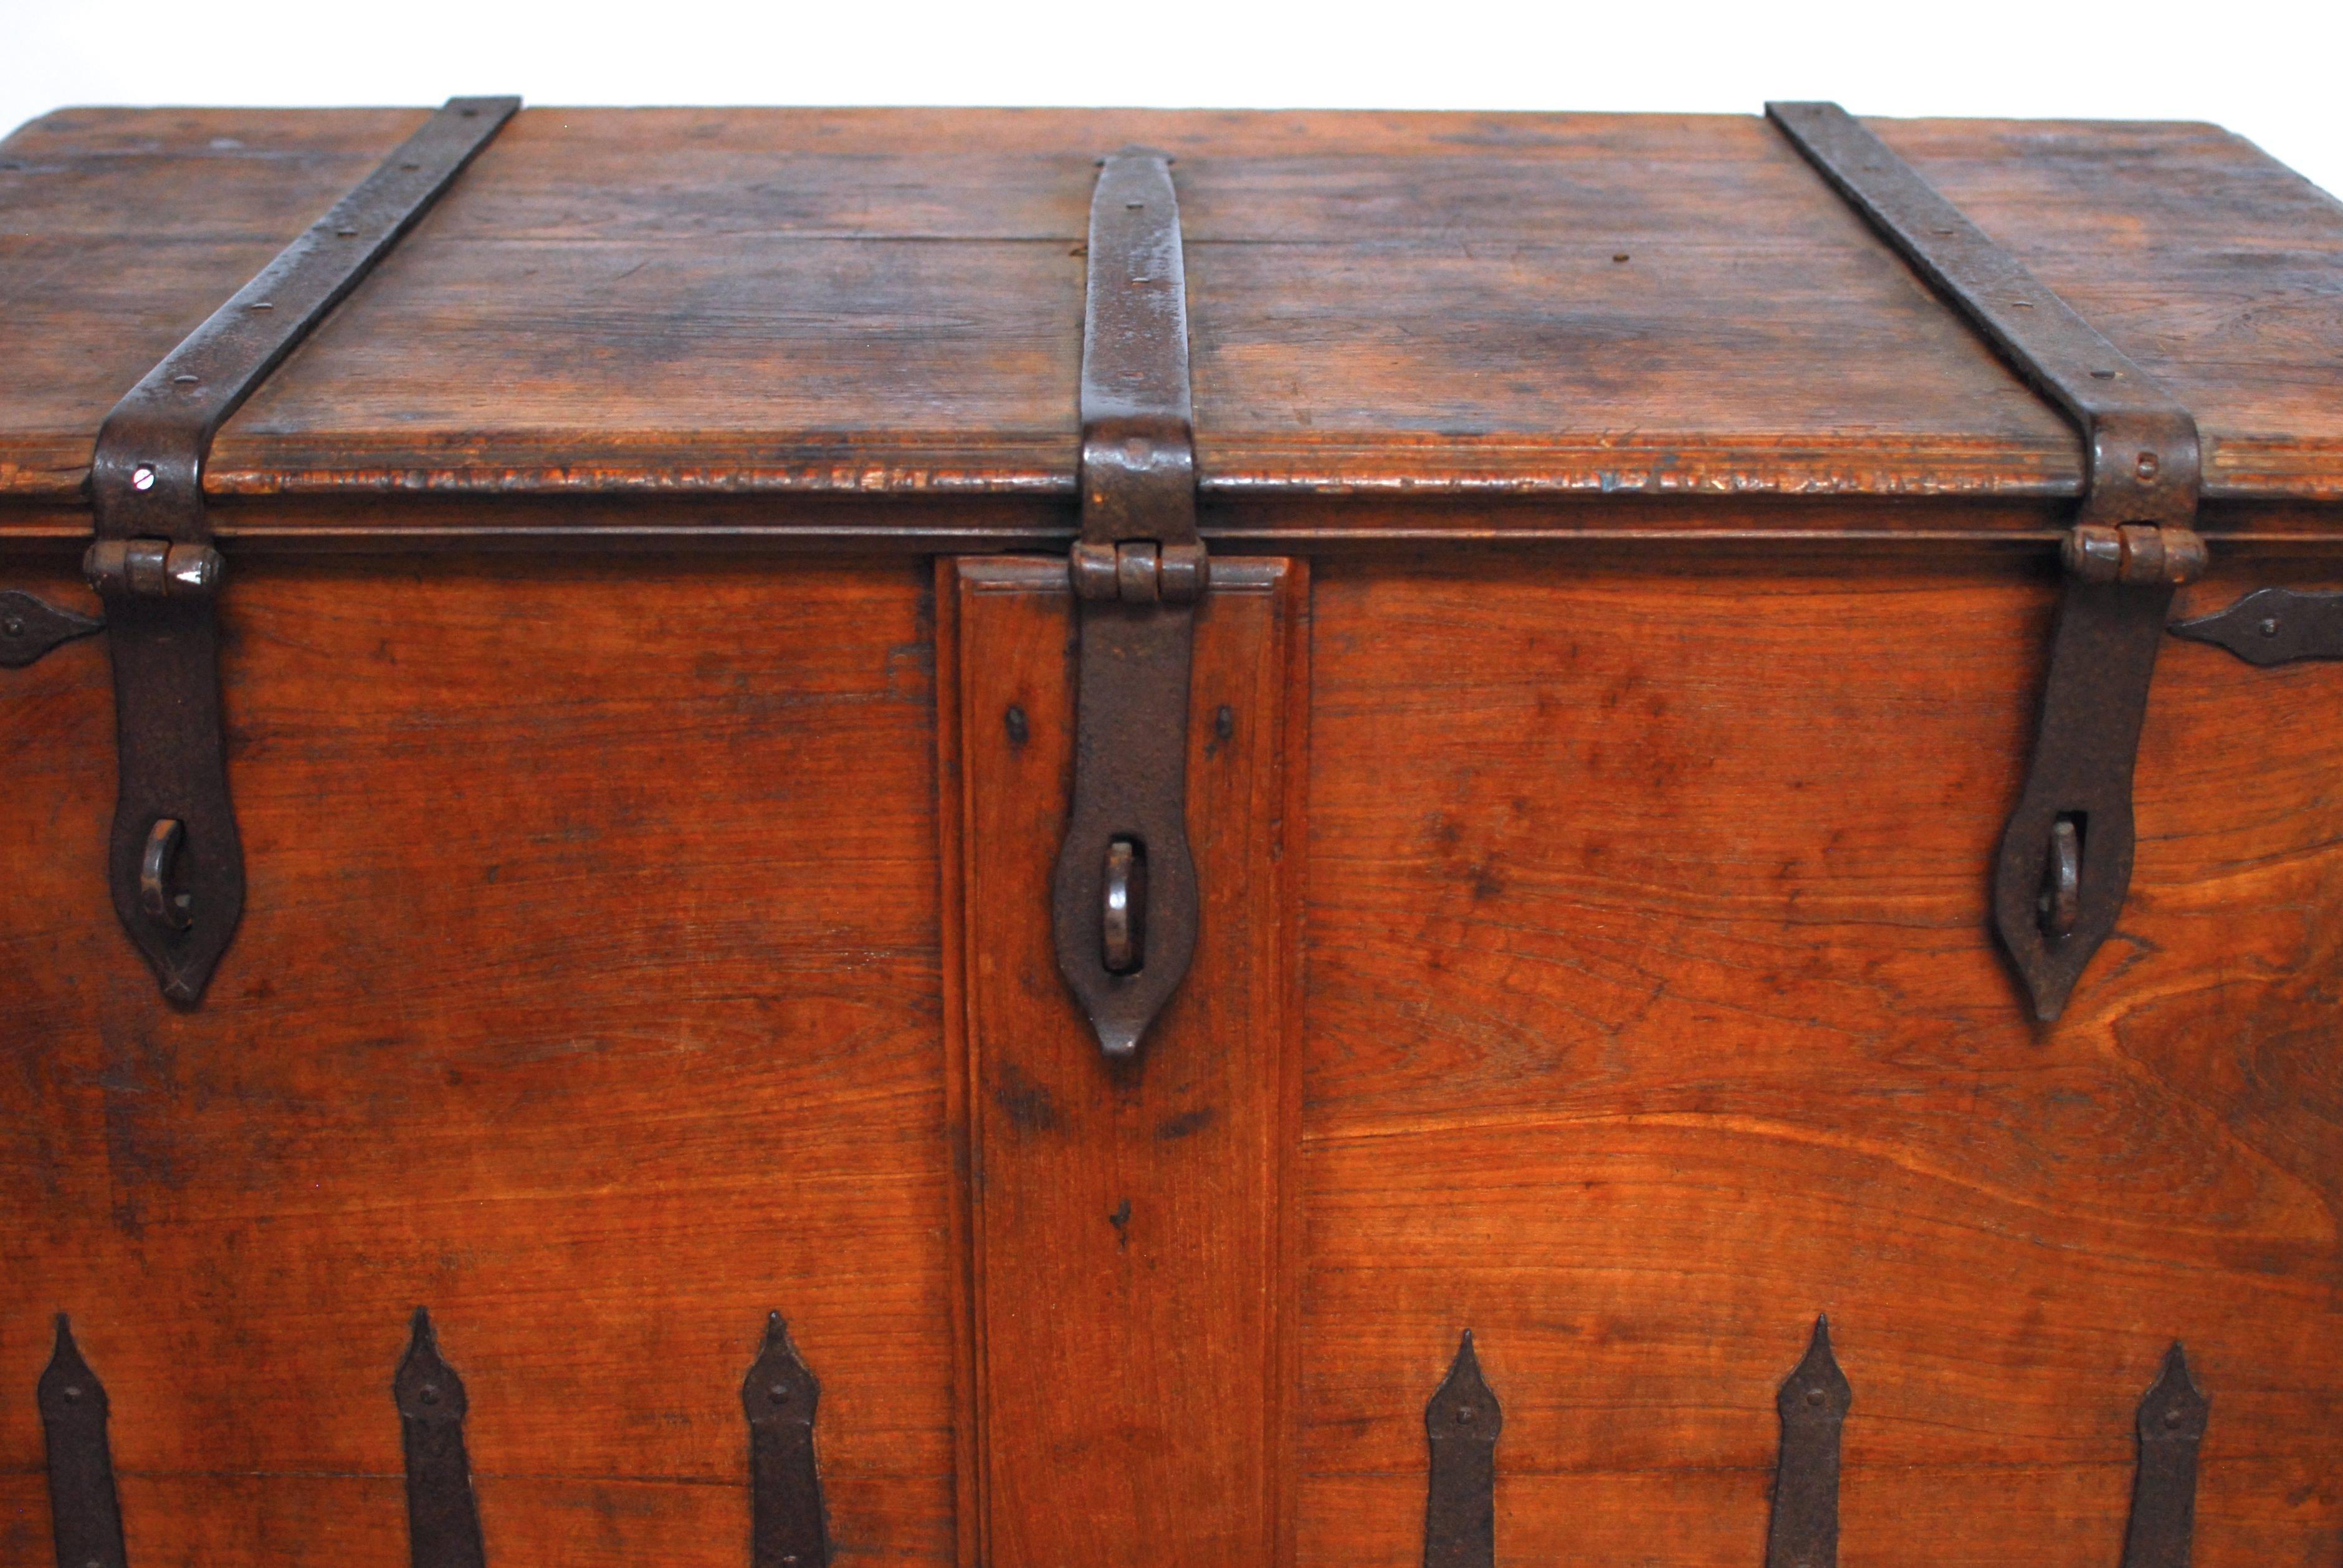 Rustic 18th century Indian Damchiya dowry hope chest sitting on Primitive wheels and featuring iron strapping and lock plates. Lovely rich patina on the hand-carved teak. Decorated on all sides and top with thick, heavy iron straps that have an Arab